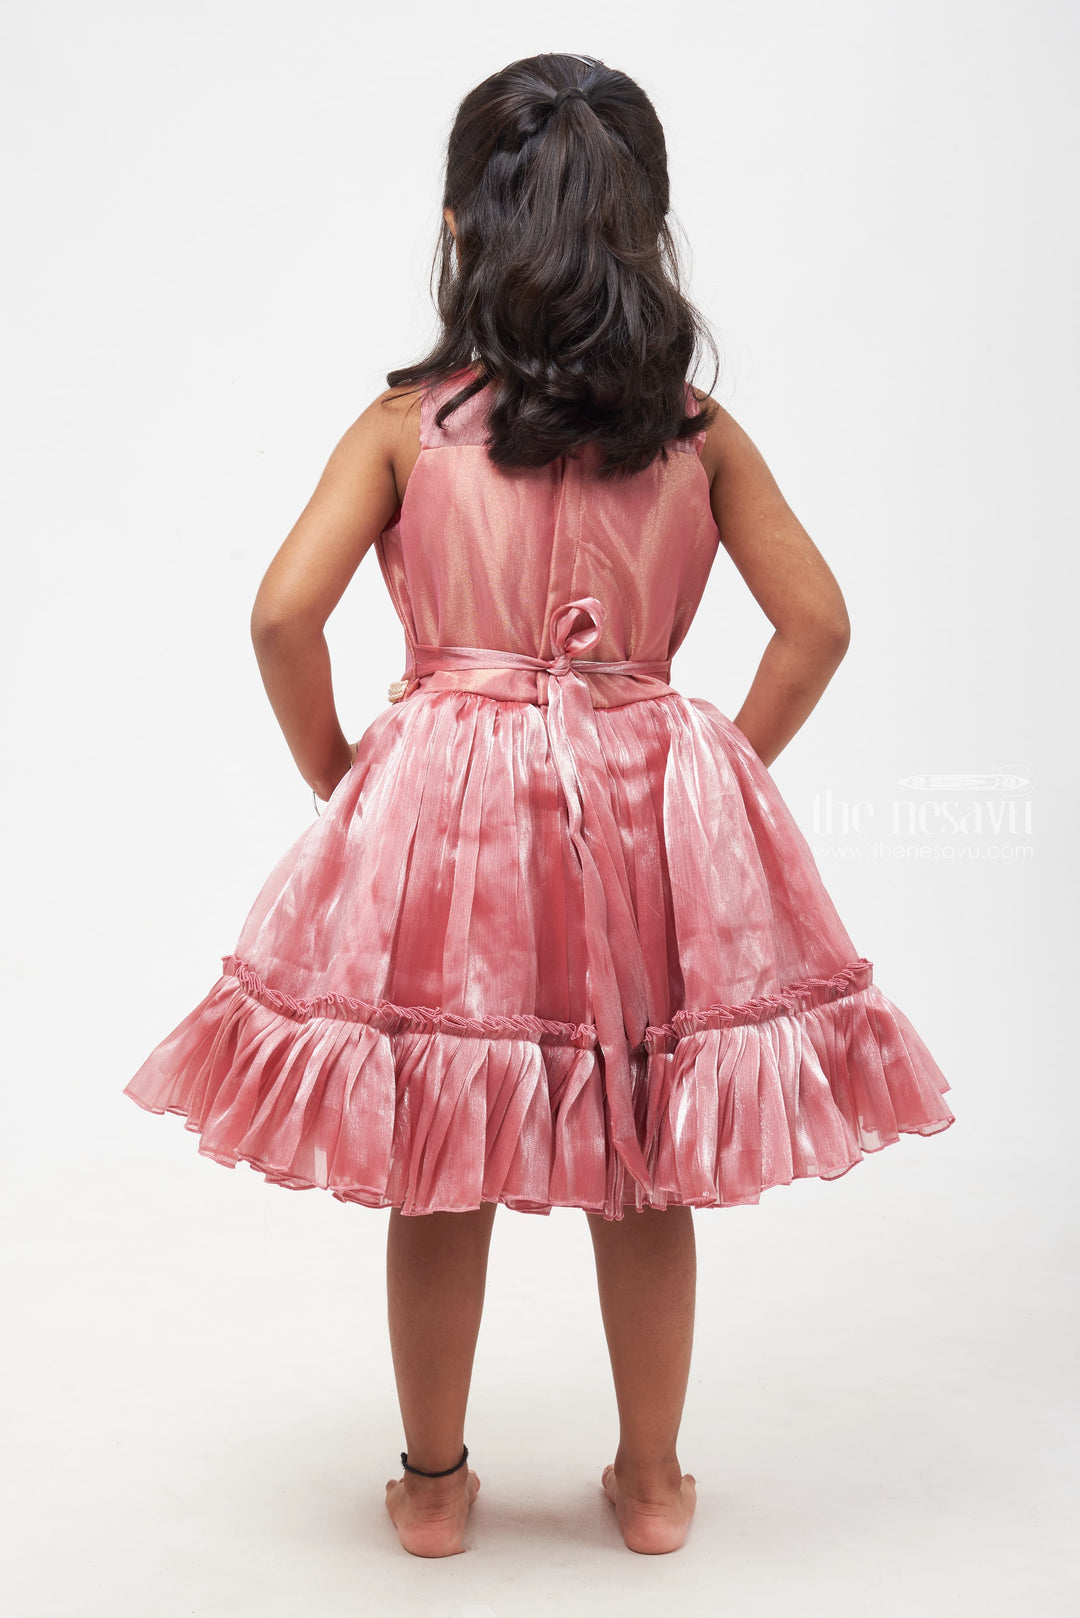 The Nesavu Girls Fancy Party Frock Luxurious Mauve Organza Dress with Floral Accent for Girls Nesavu Organza Dress with Floral Detail & Tiered Skirt - Premium Wear for Young Girls | The Nesavu